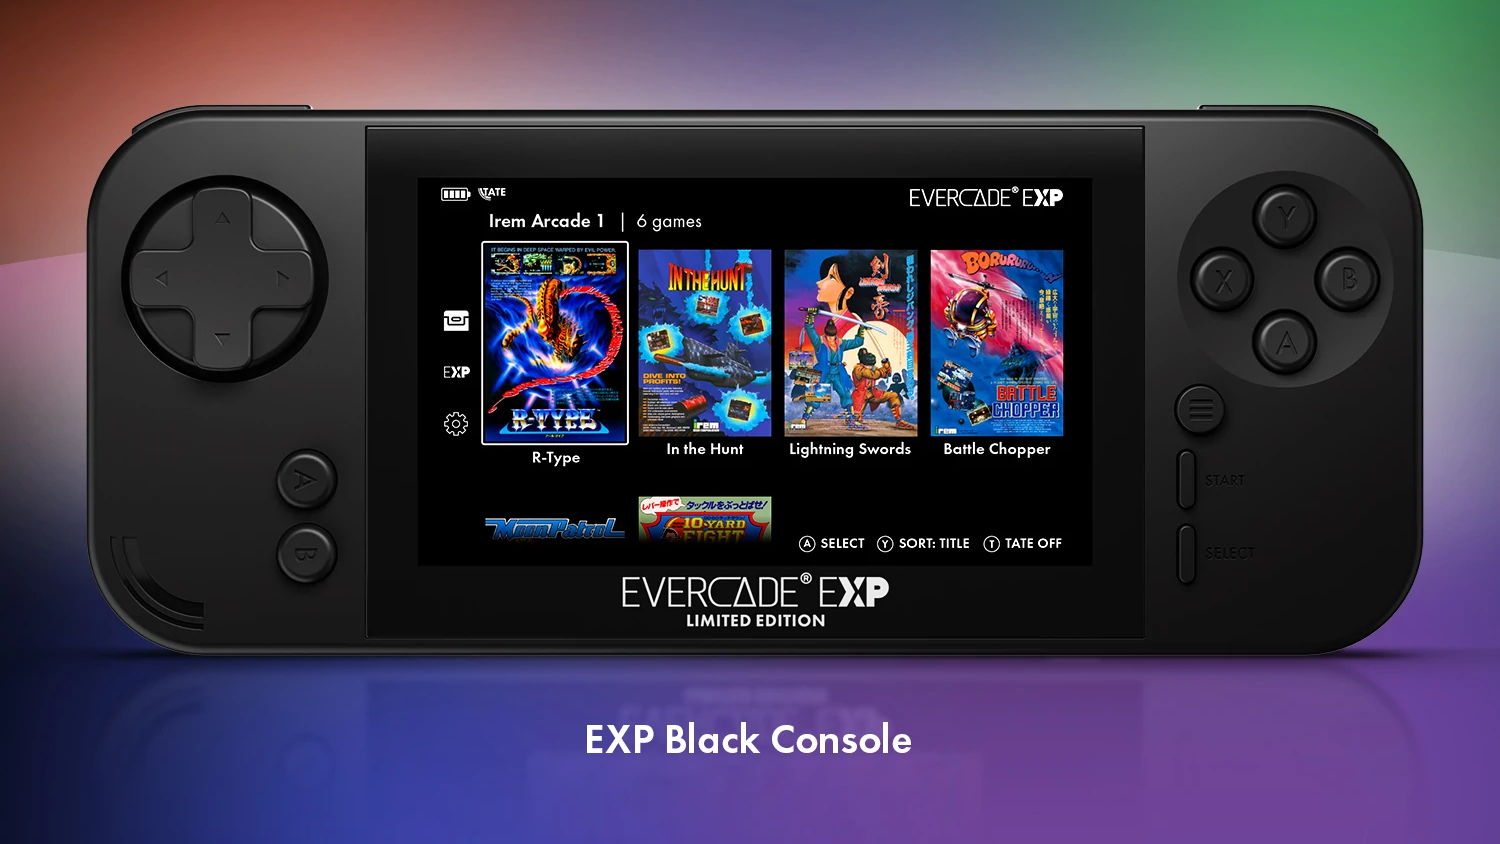 The Evercade EXP limited edition handheld console